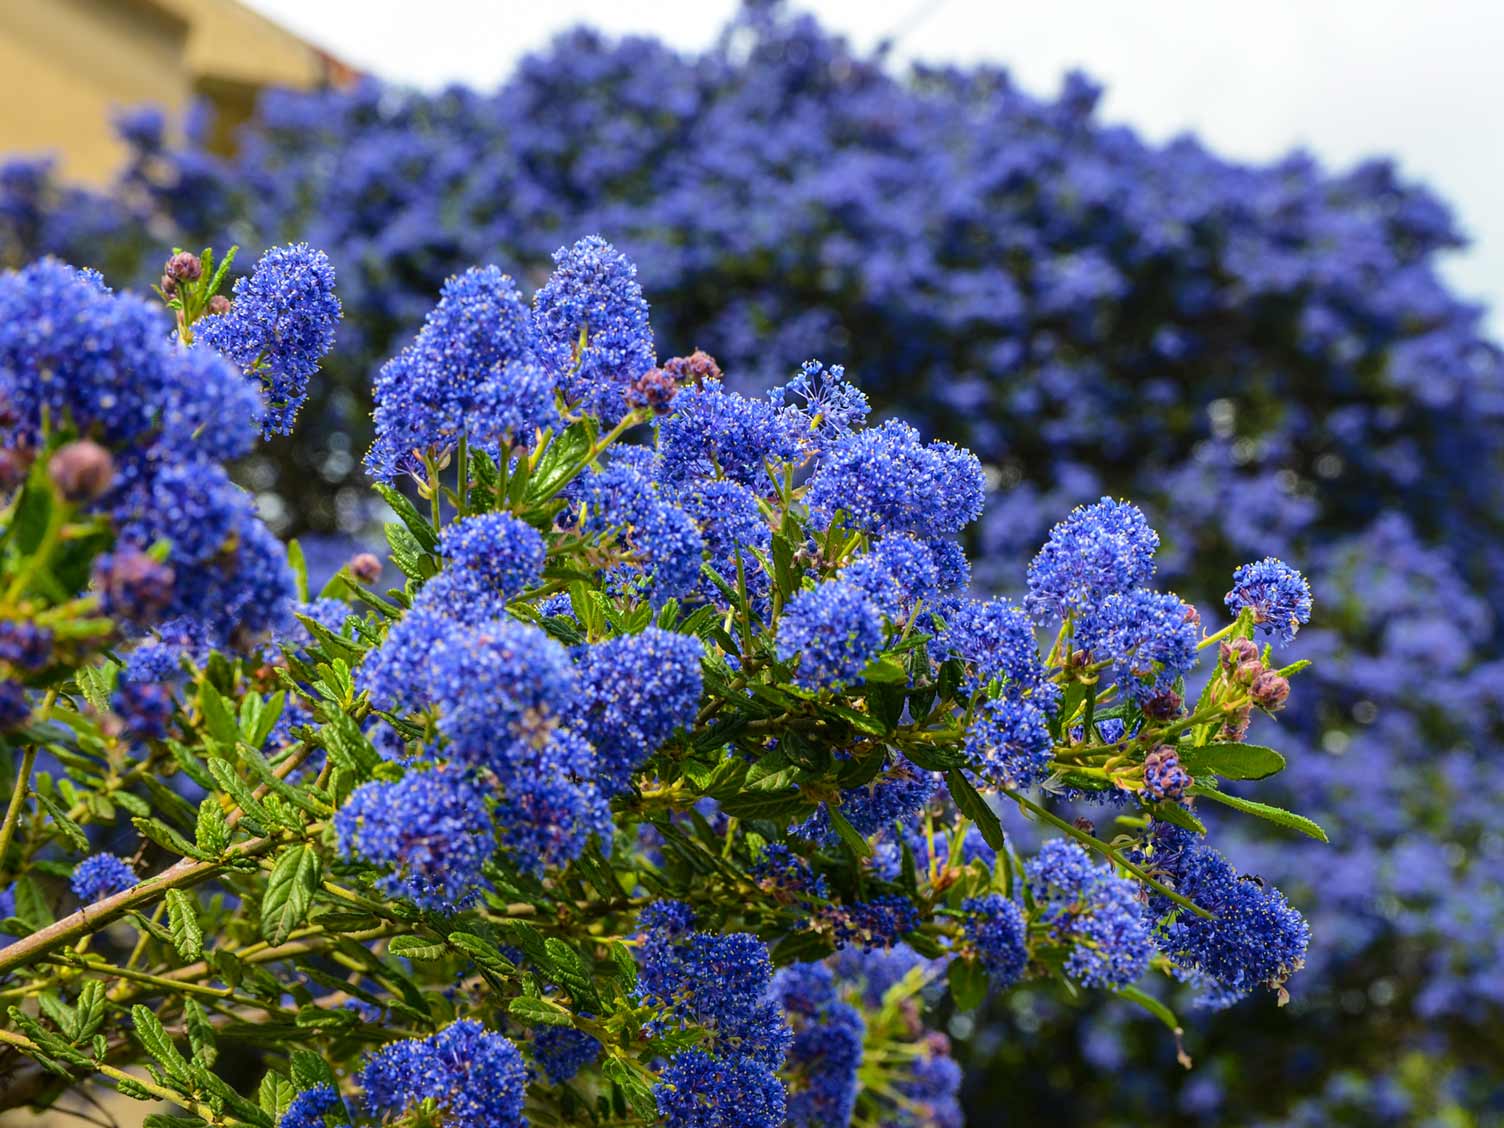 How To Propagate Ceanothus From Cuttings